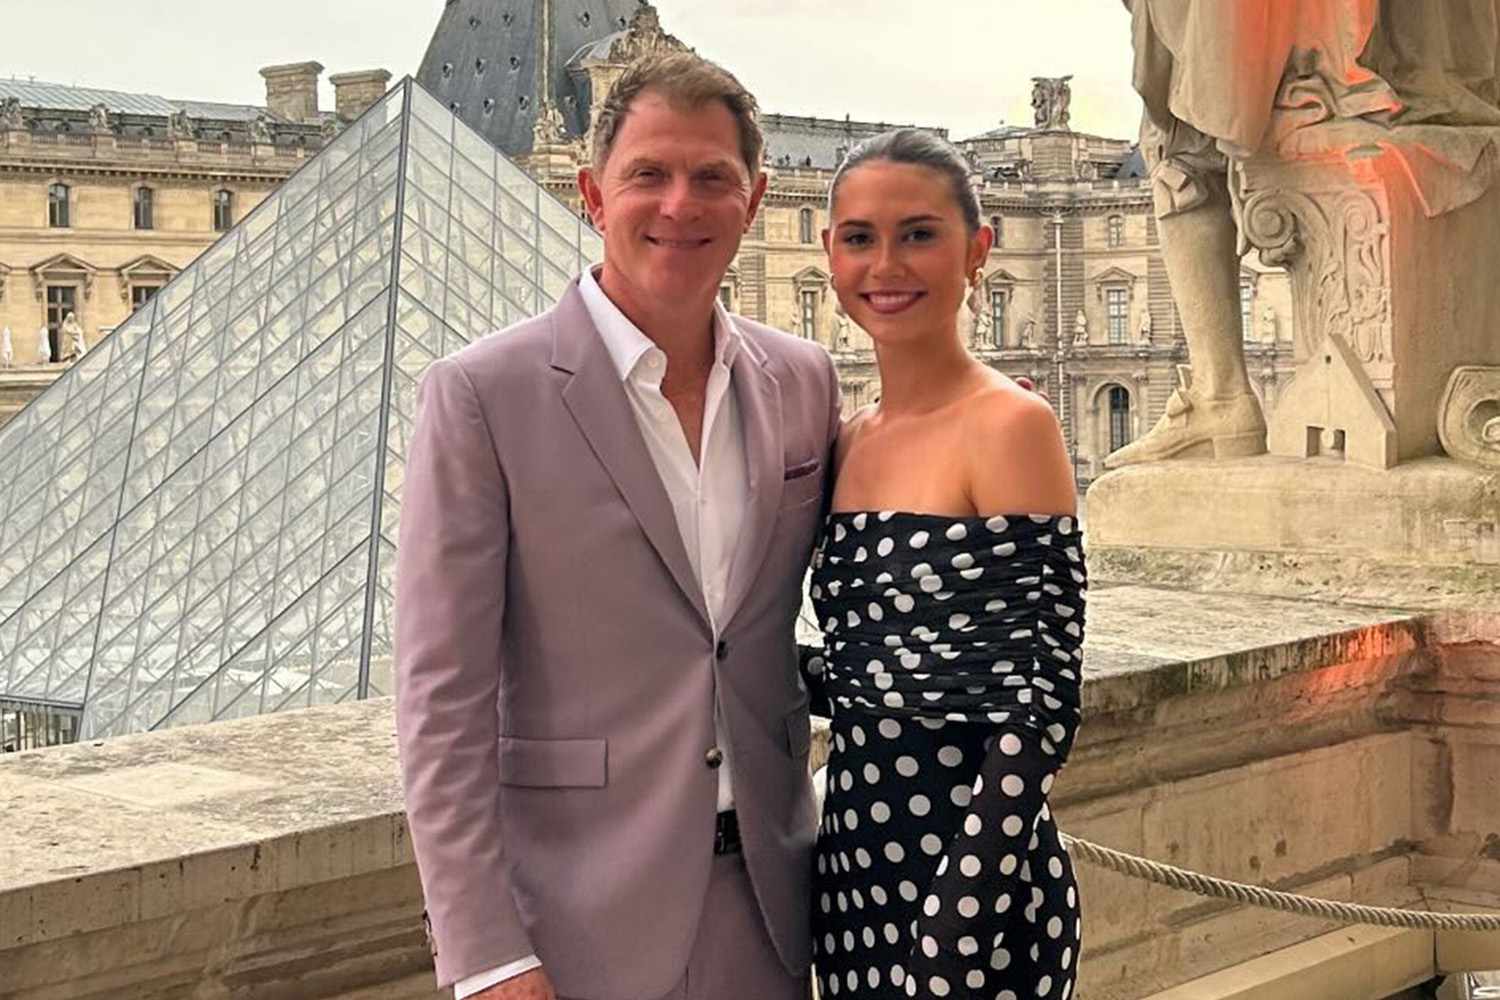 Bobby Flay and Daughter Sophie Are All Dressed Up at the Louvre During Father-Daughter Trip for the Paris Olympics